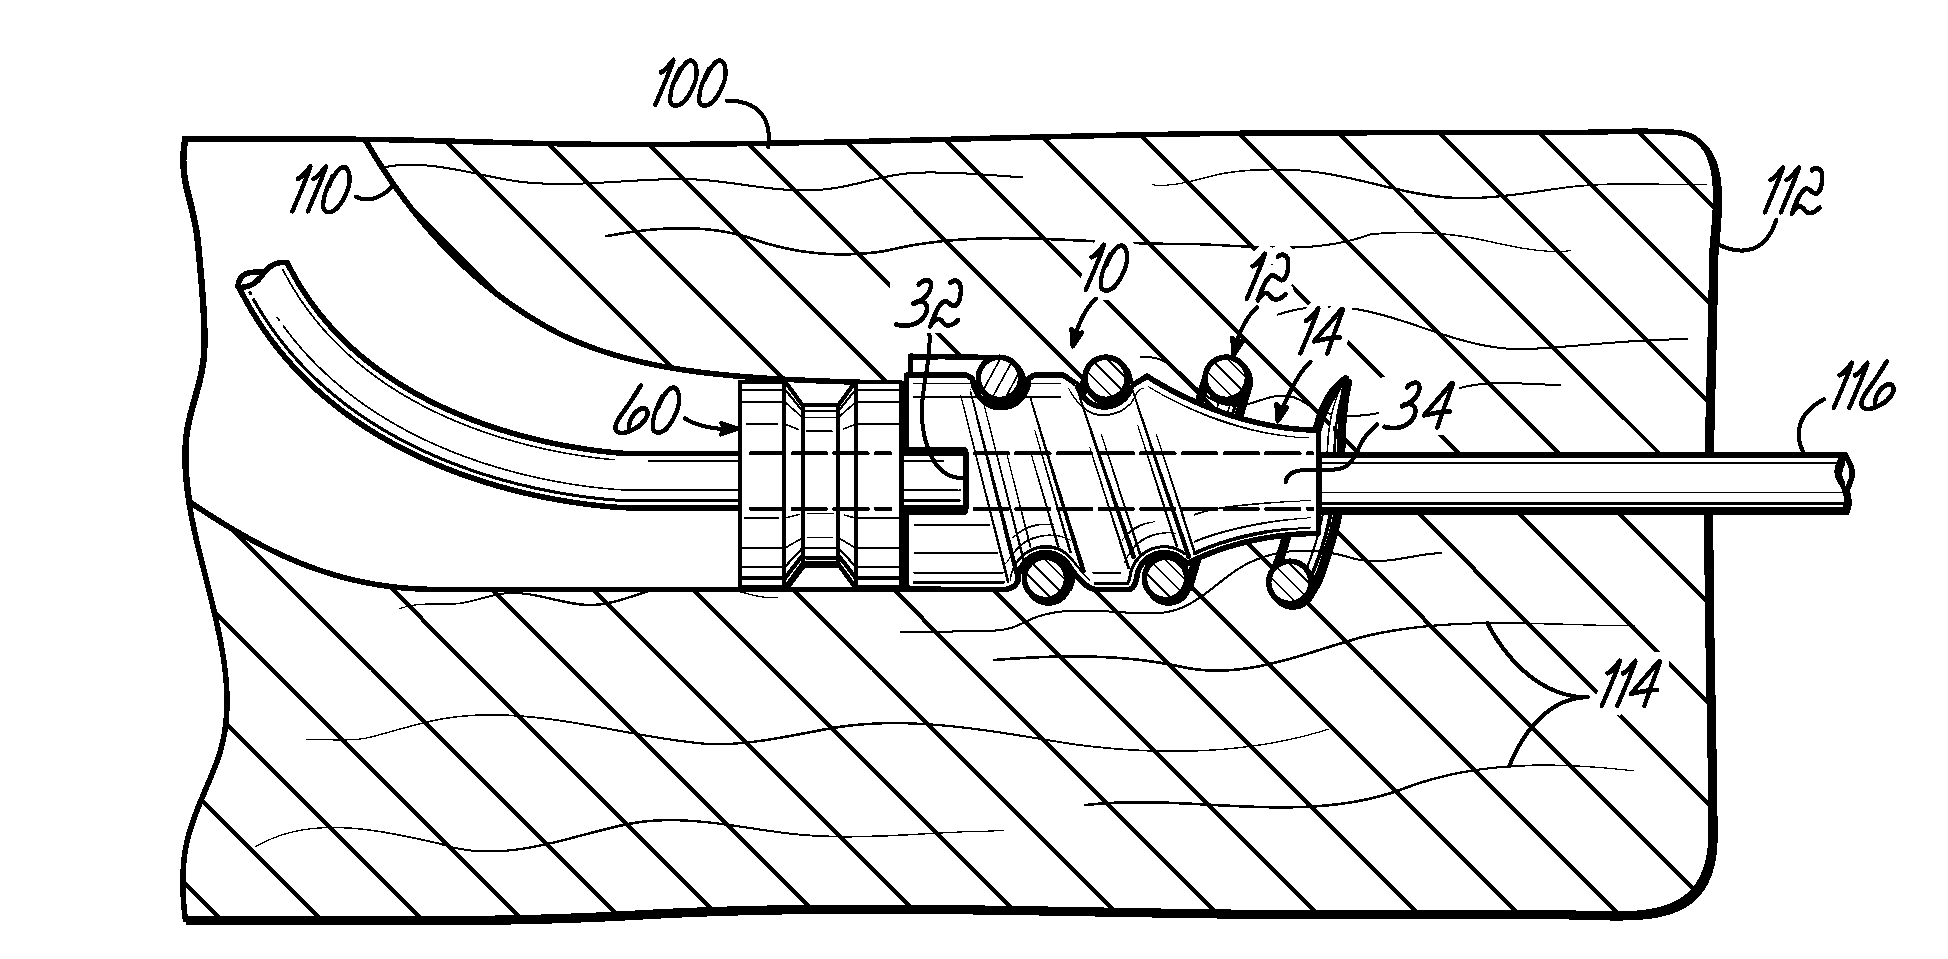 Apparatus and methods for tendon or ligament repair